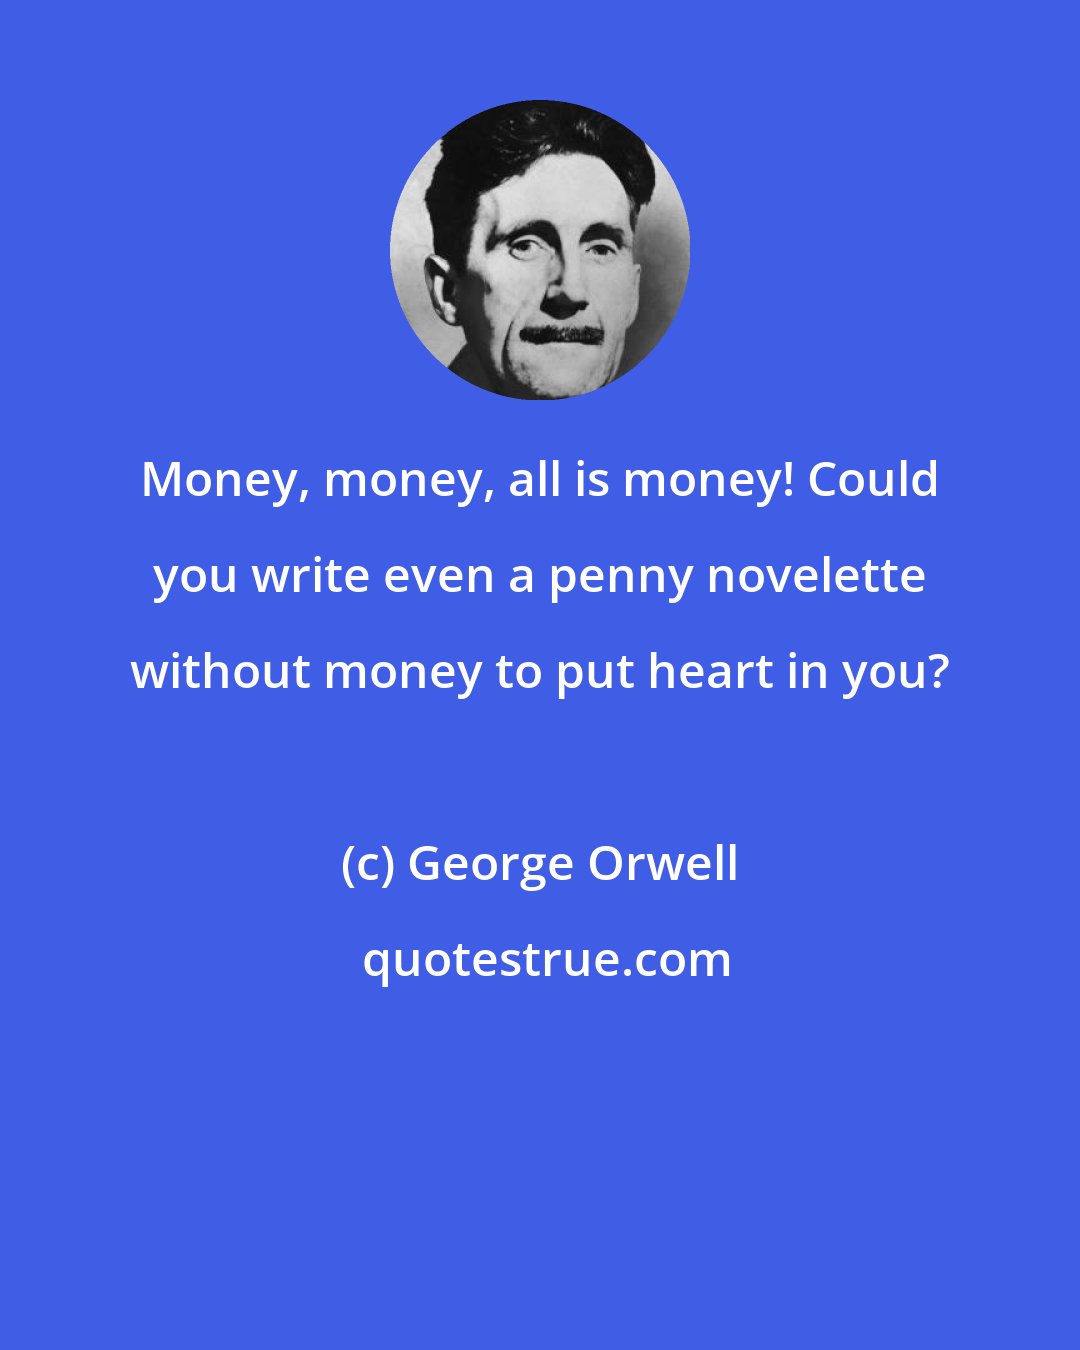 George Orwell: Money, money, all is money! Could you write even a penny novelette without money to put heart in you?